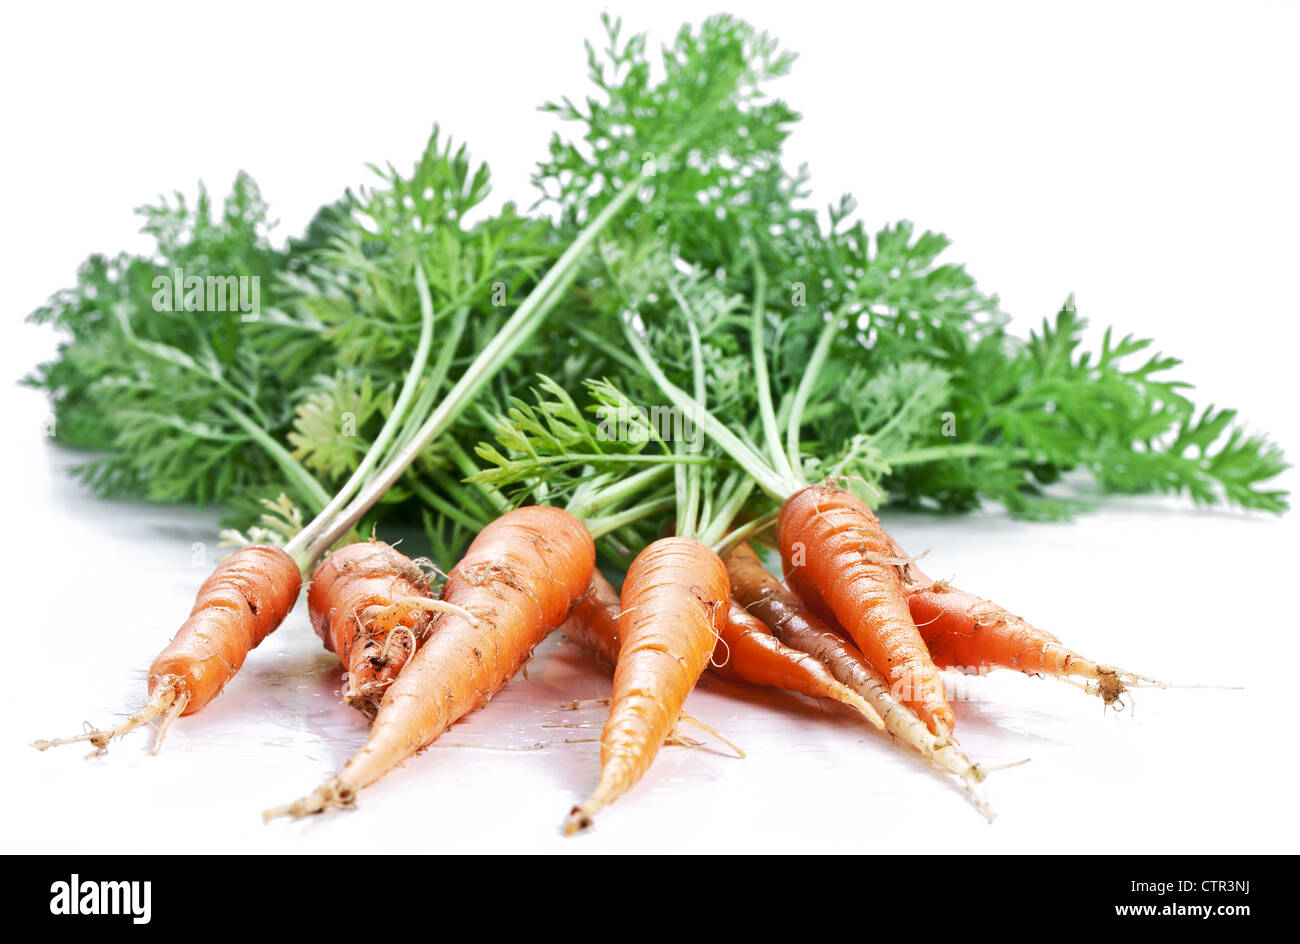 Carrots with leaves on a white background. Stock Photo